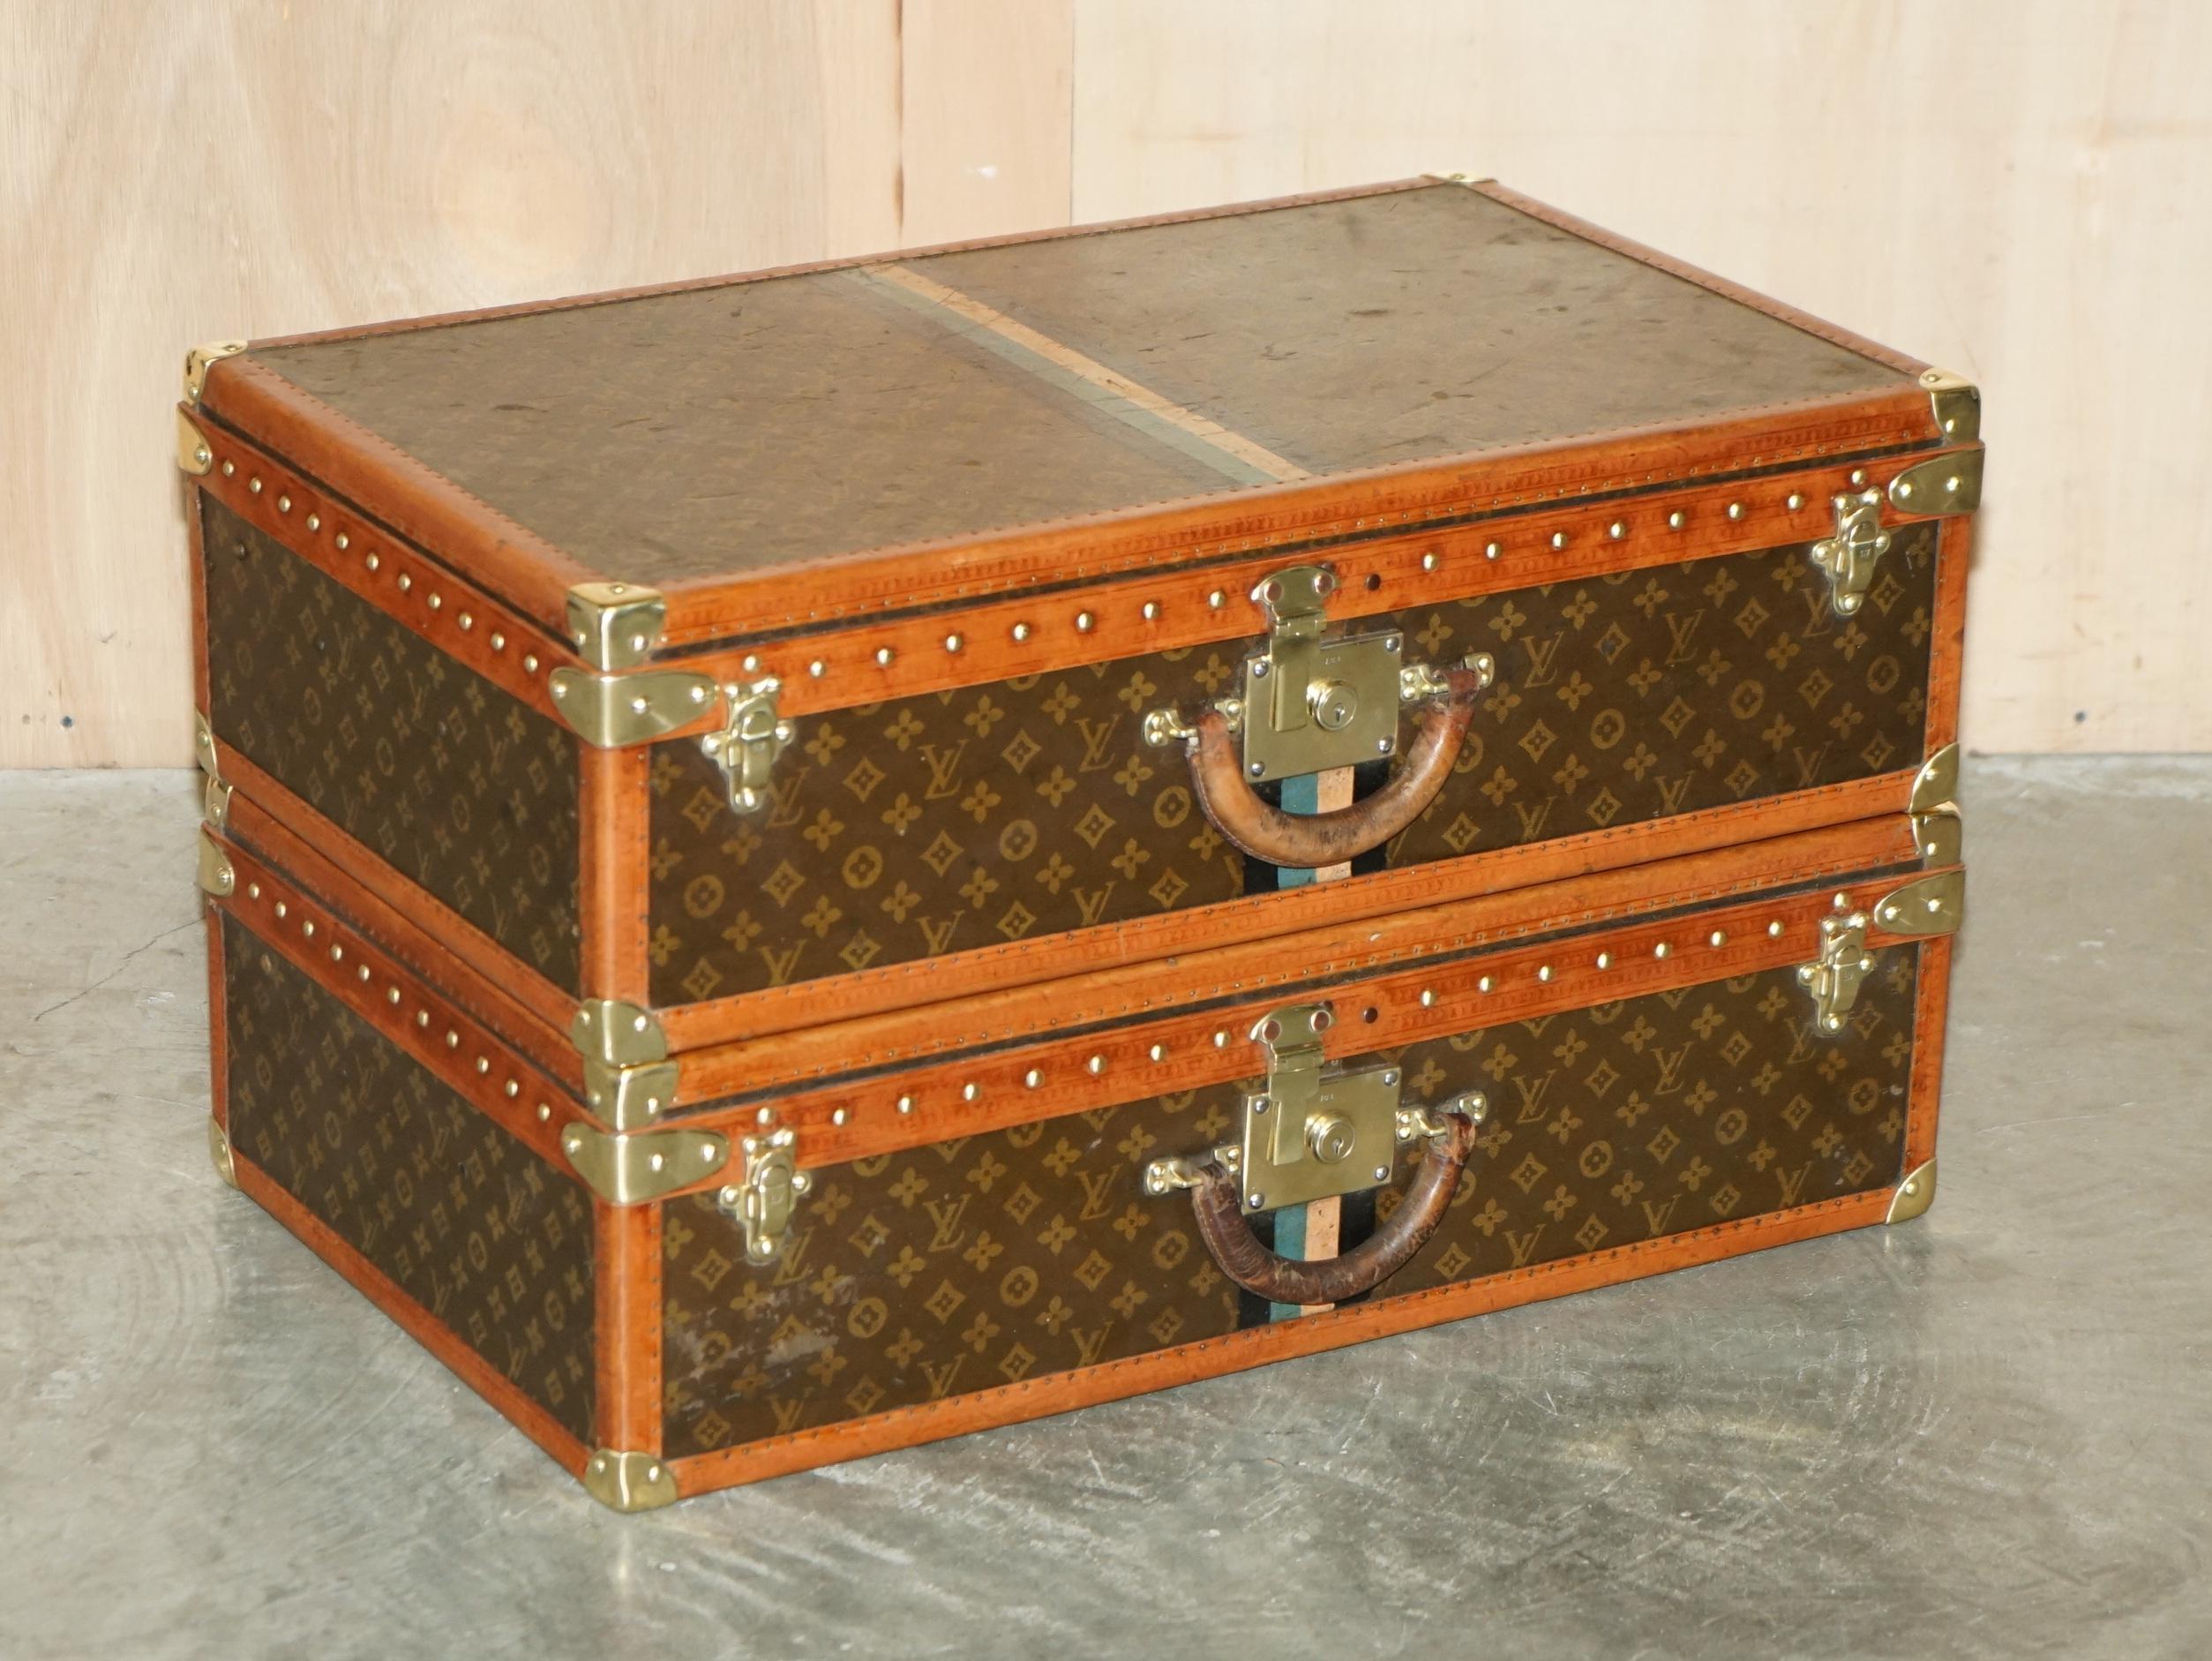 Royal House Antiques

Royal House Antiques is delighted to offer for sale this absolutely stunning pair of fully restored original Louis Vuitton Monogram Suitcase trunks 

Please note the delivery fee listed is just a guide, it covers within the M25